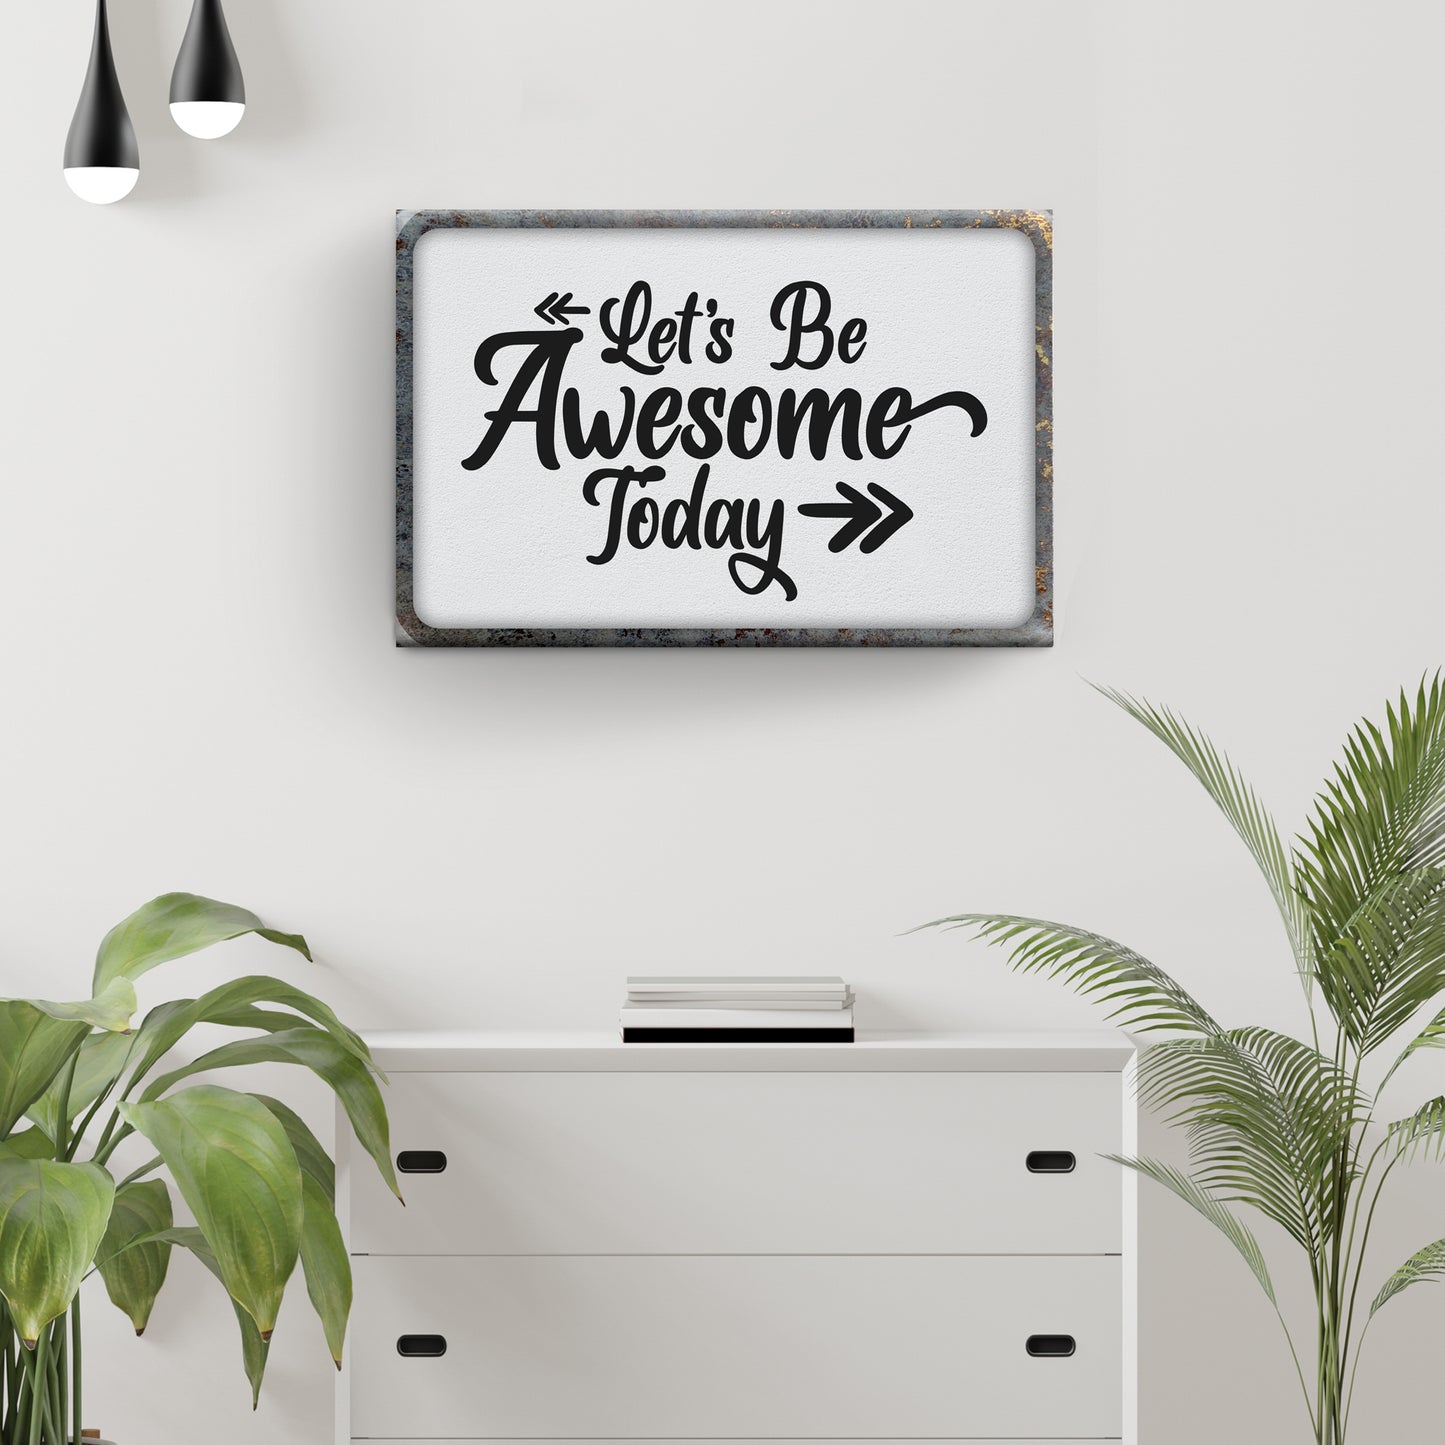 Let's Be Awesome Today Sign - Image by Tailored Canvases